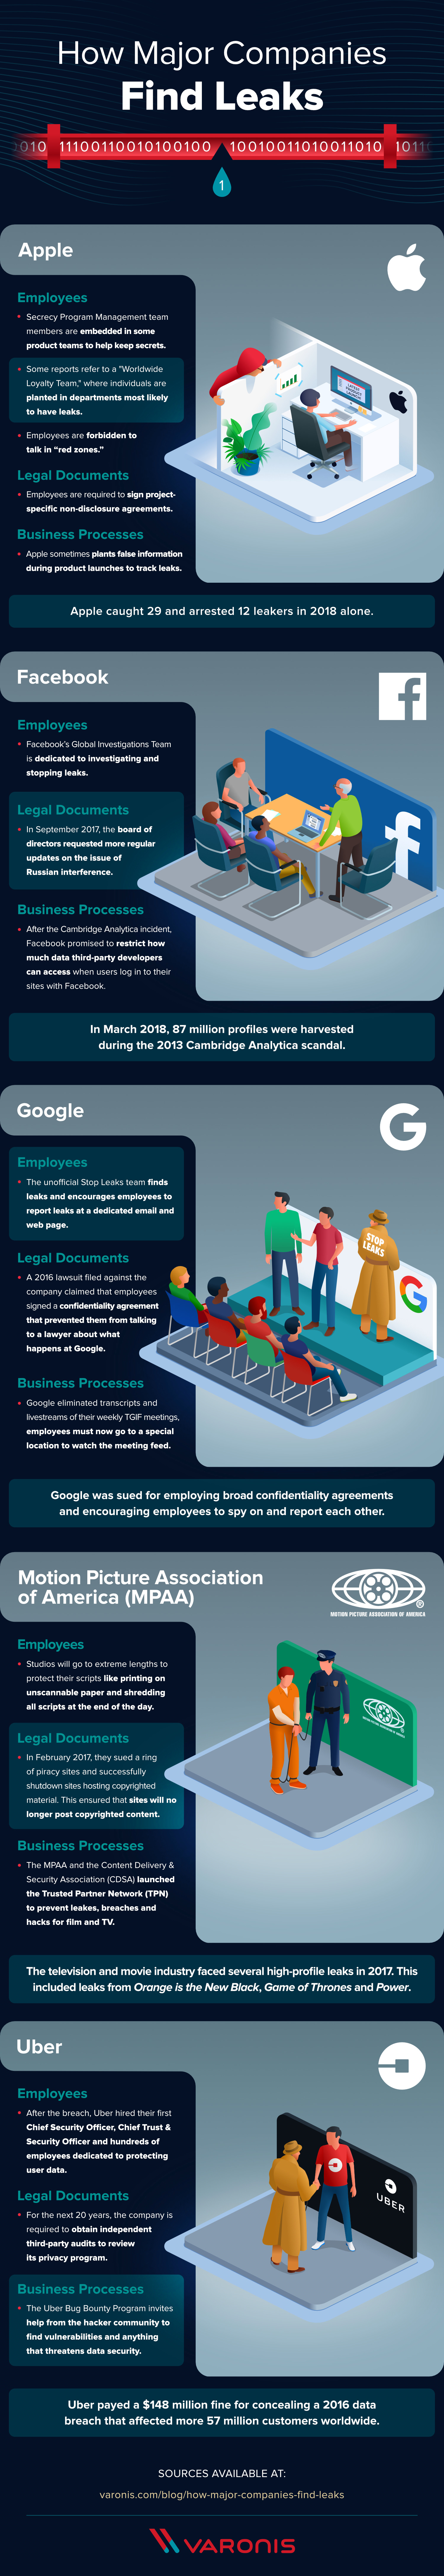 how major companies find leaks infographic